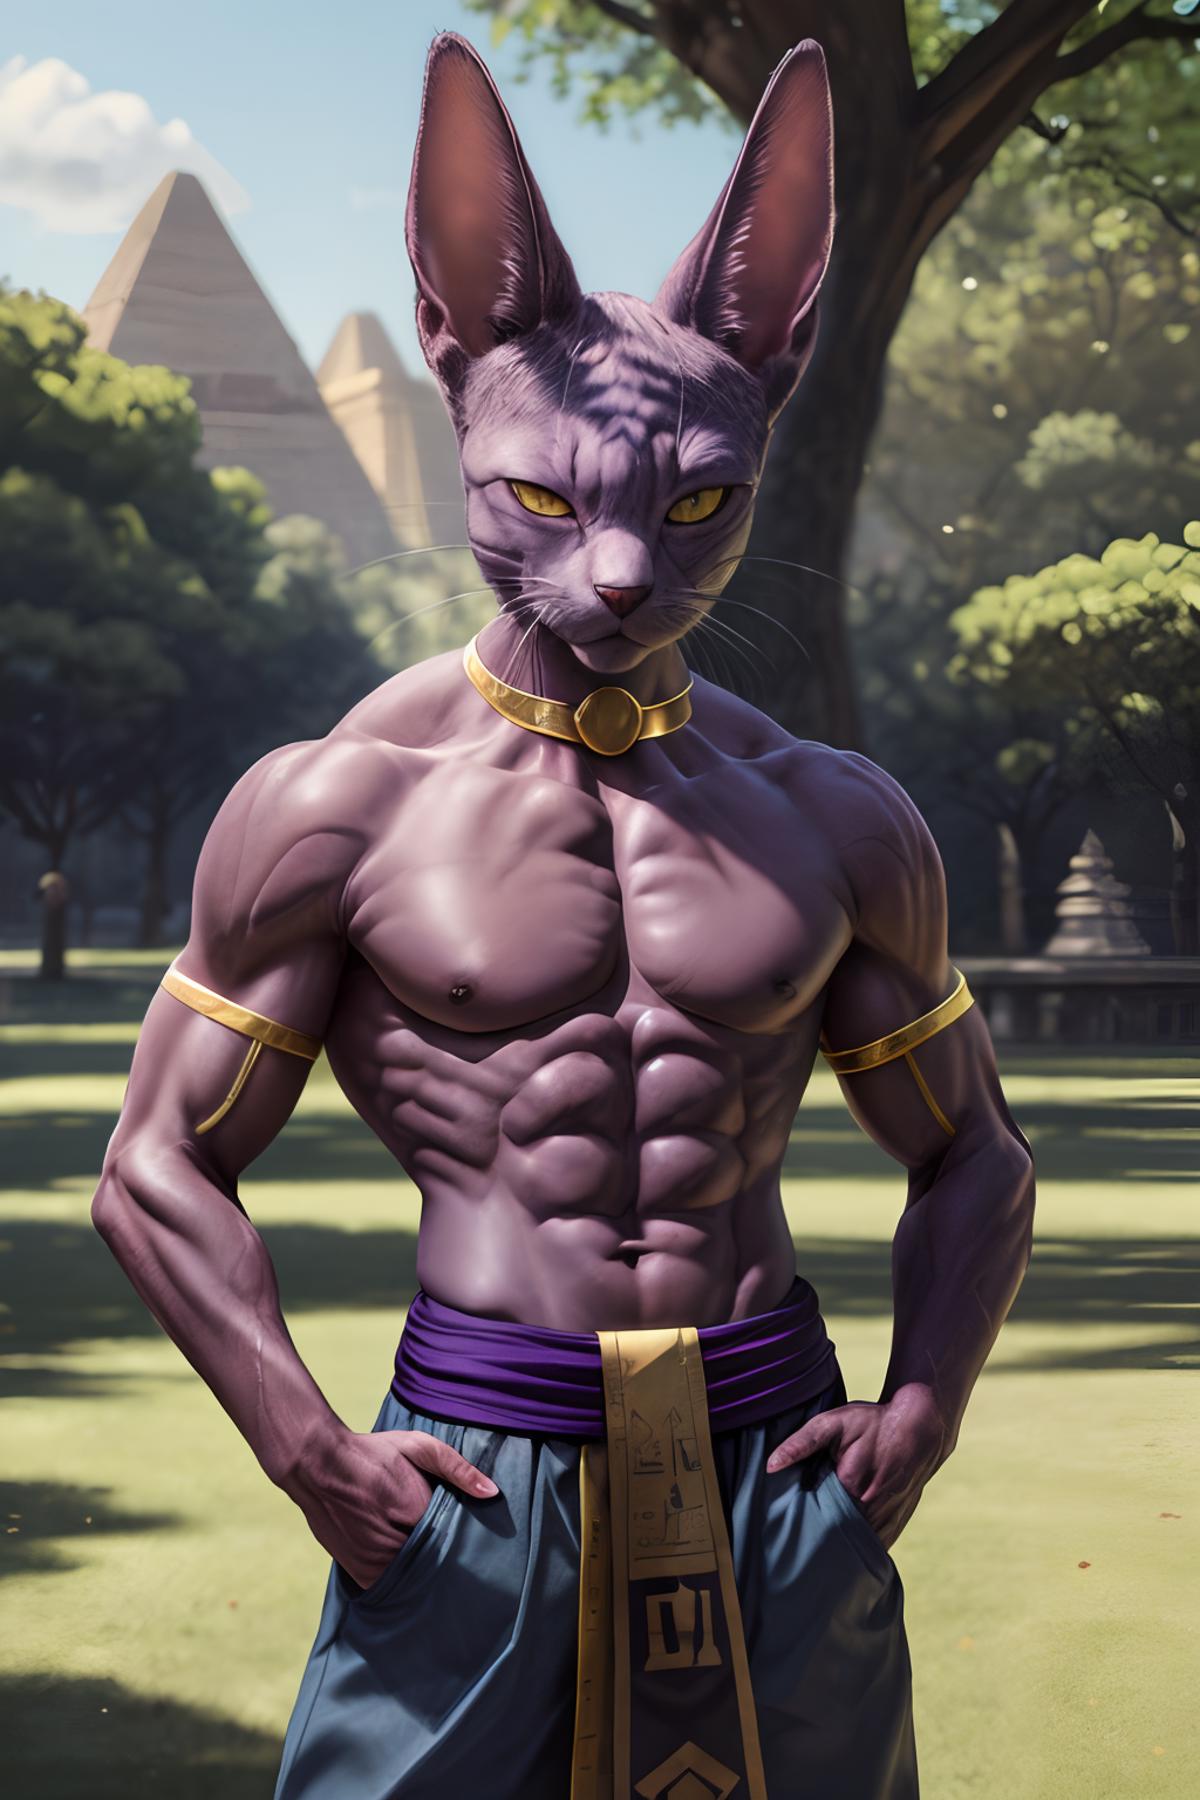 A cartoon image of a purple cat person with a six-pack, standing in a grassy field.